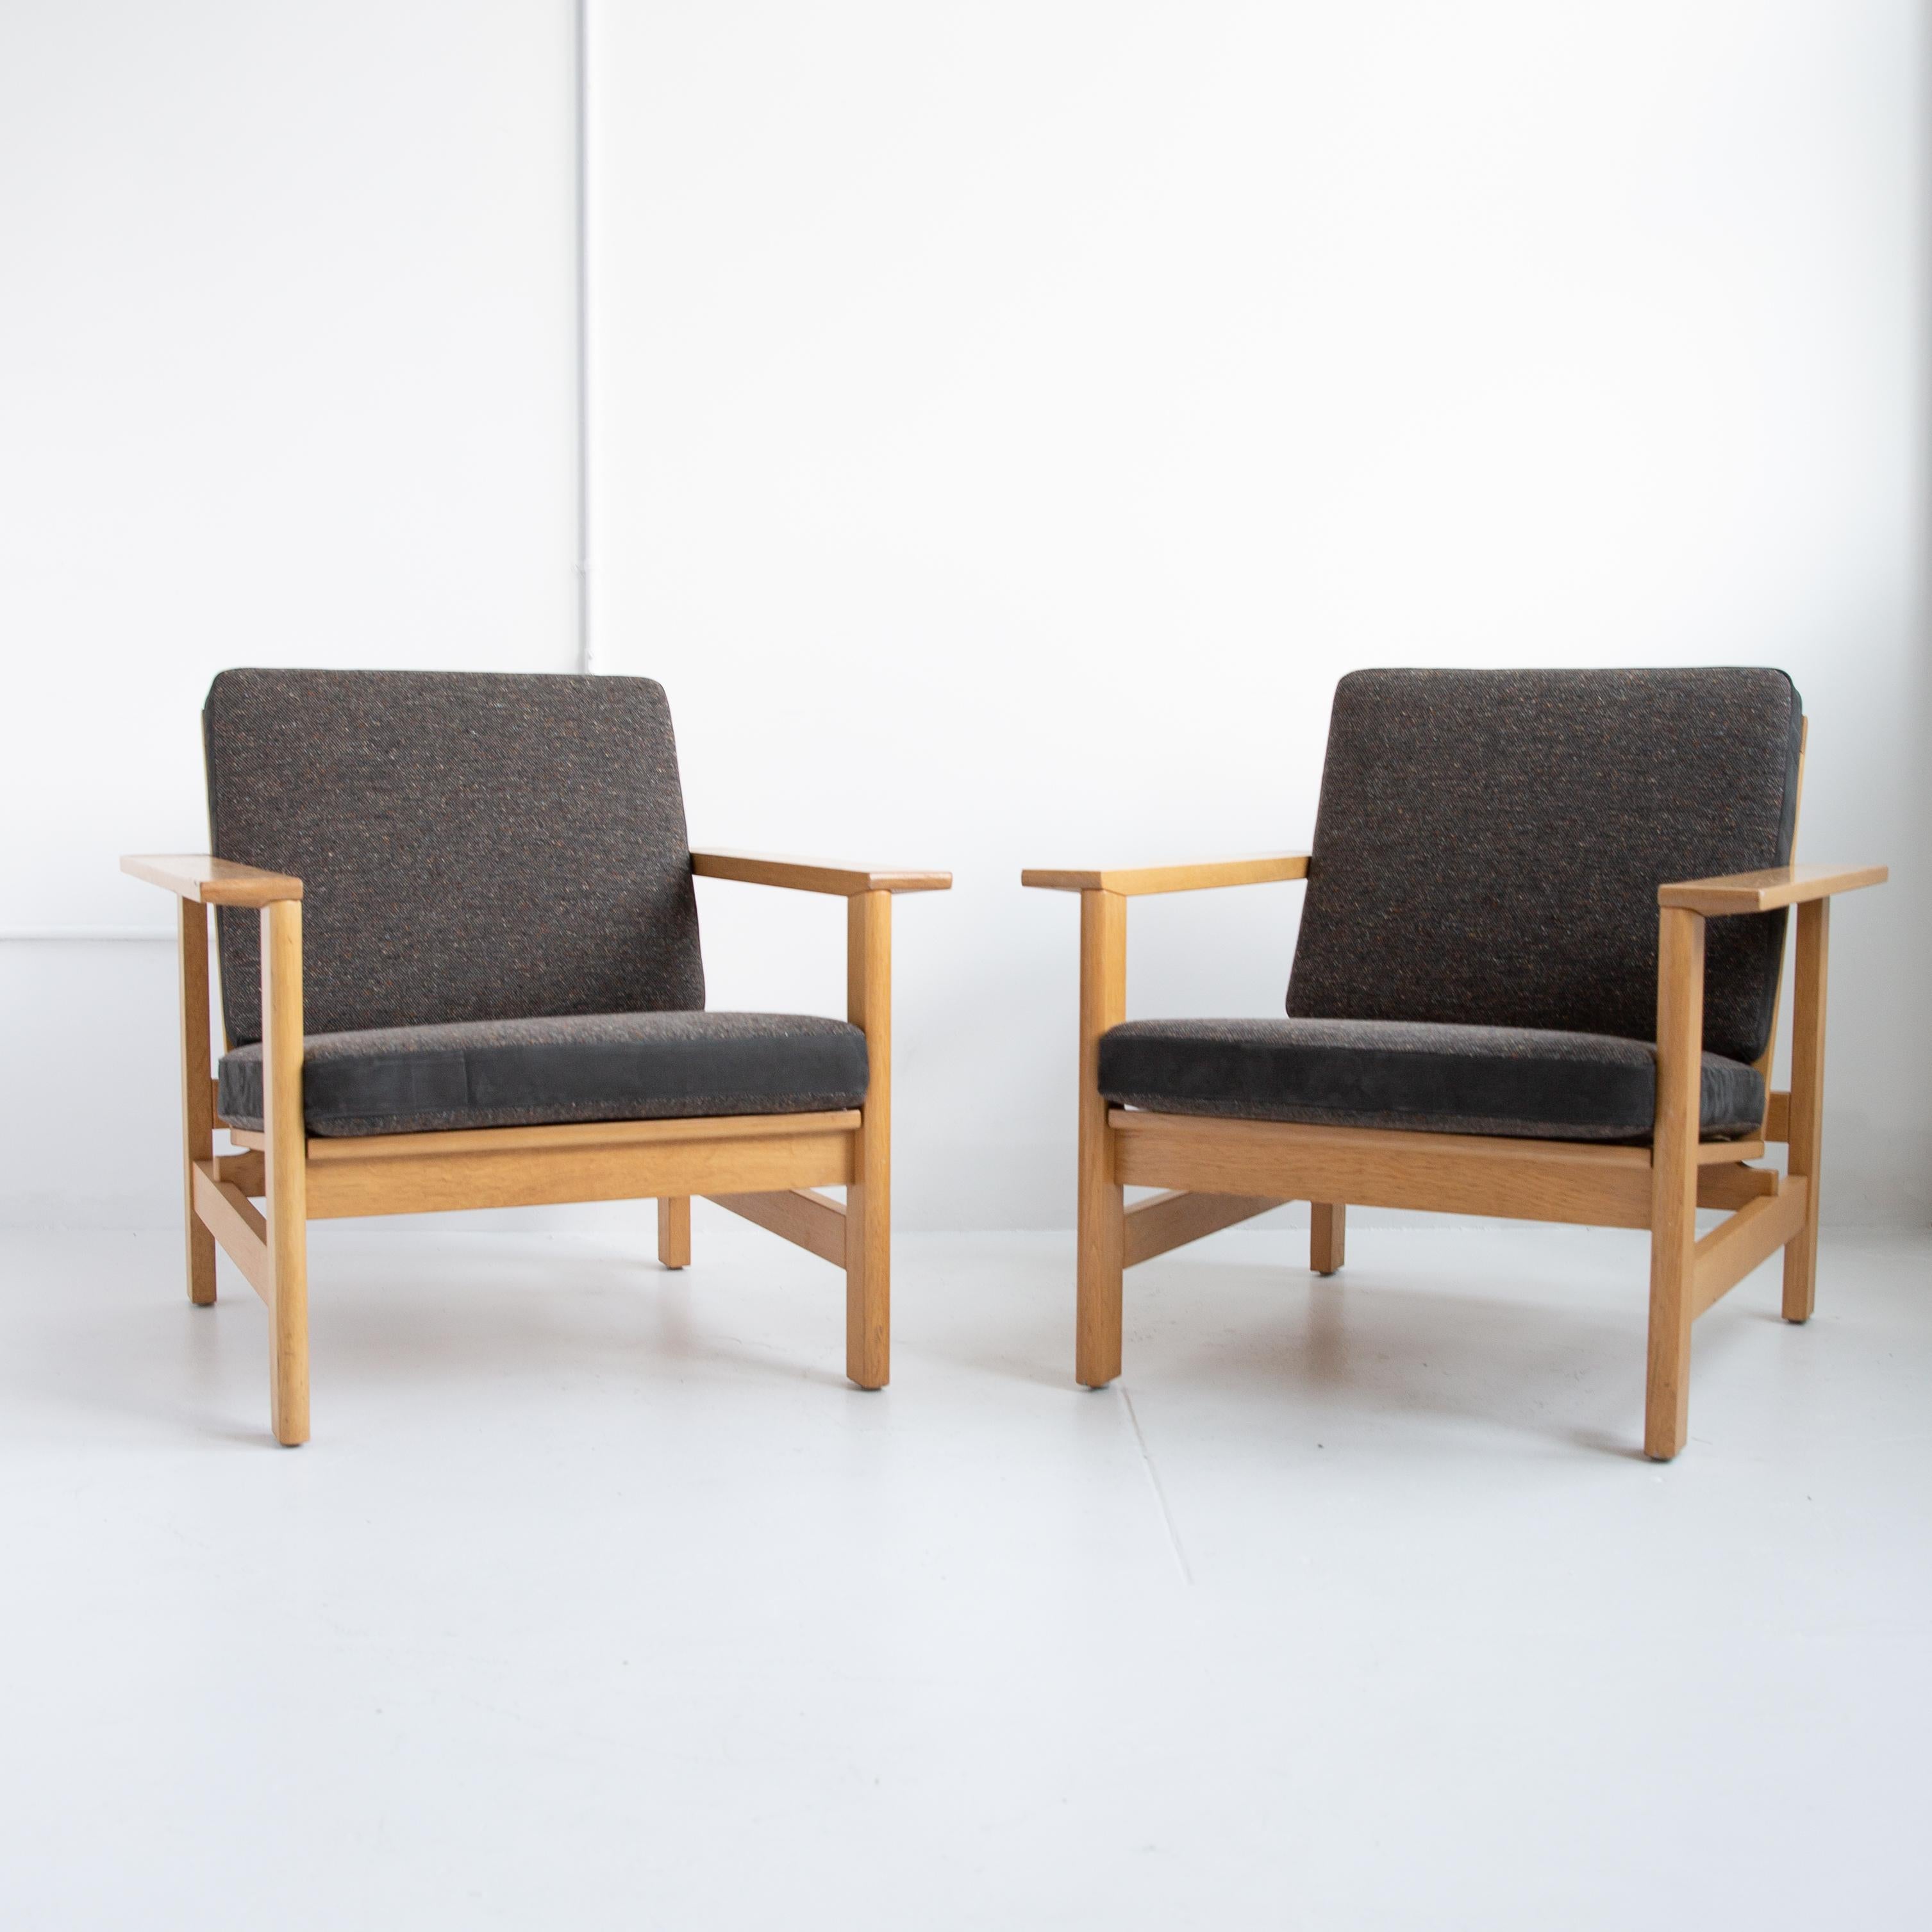 Handsome pair of Soren Holst lounge chairs with solid oakwood frames and newly reupholstered seat cushions featuring a beautiful charcoal fabric and suede on the sides. The structure and beautiful joinery of the Danish designer's work reflects his